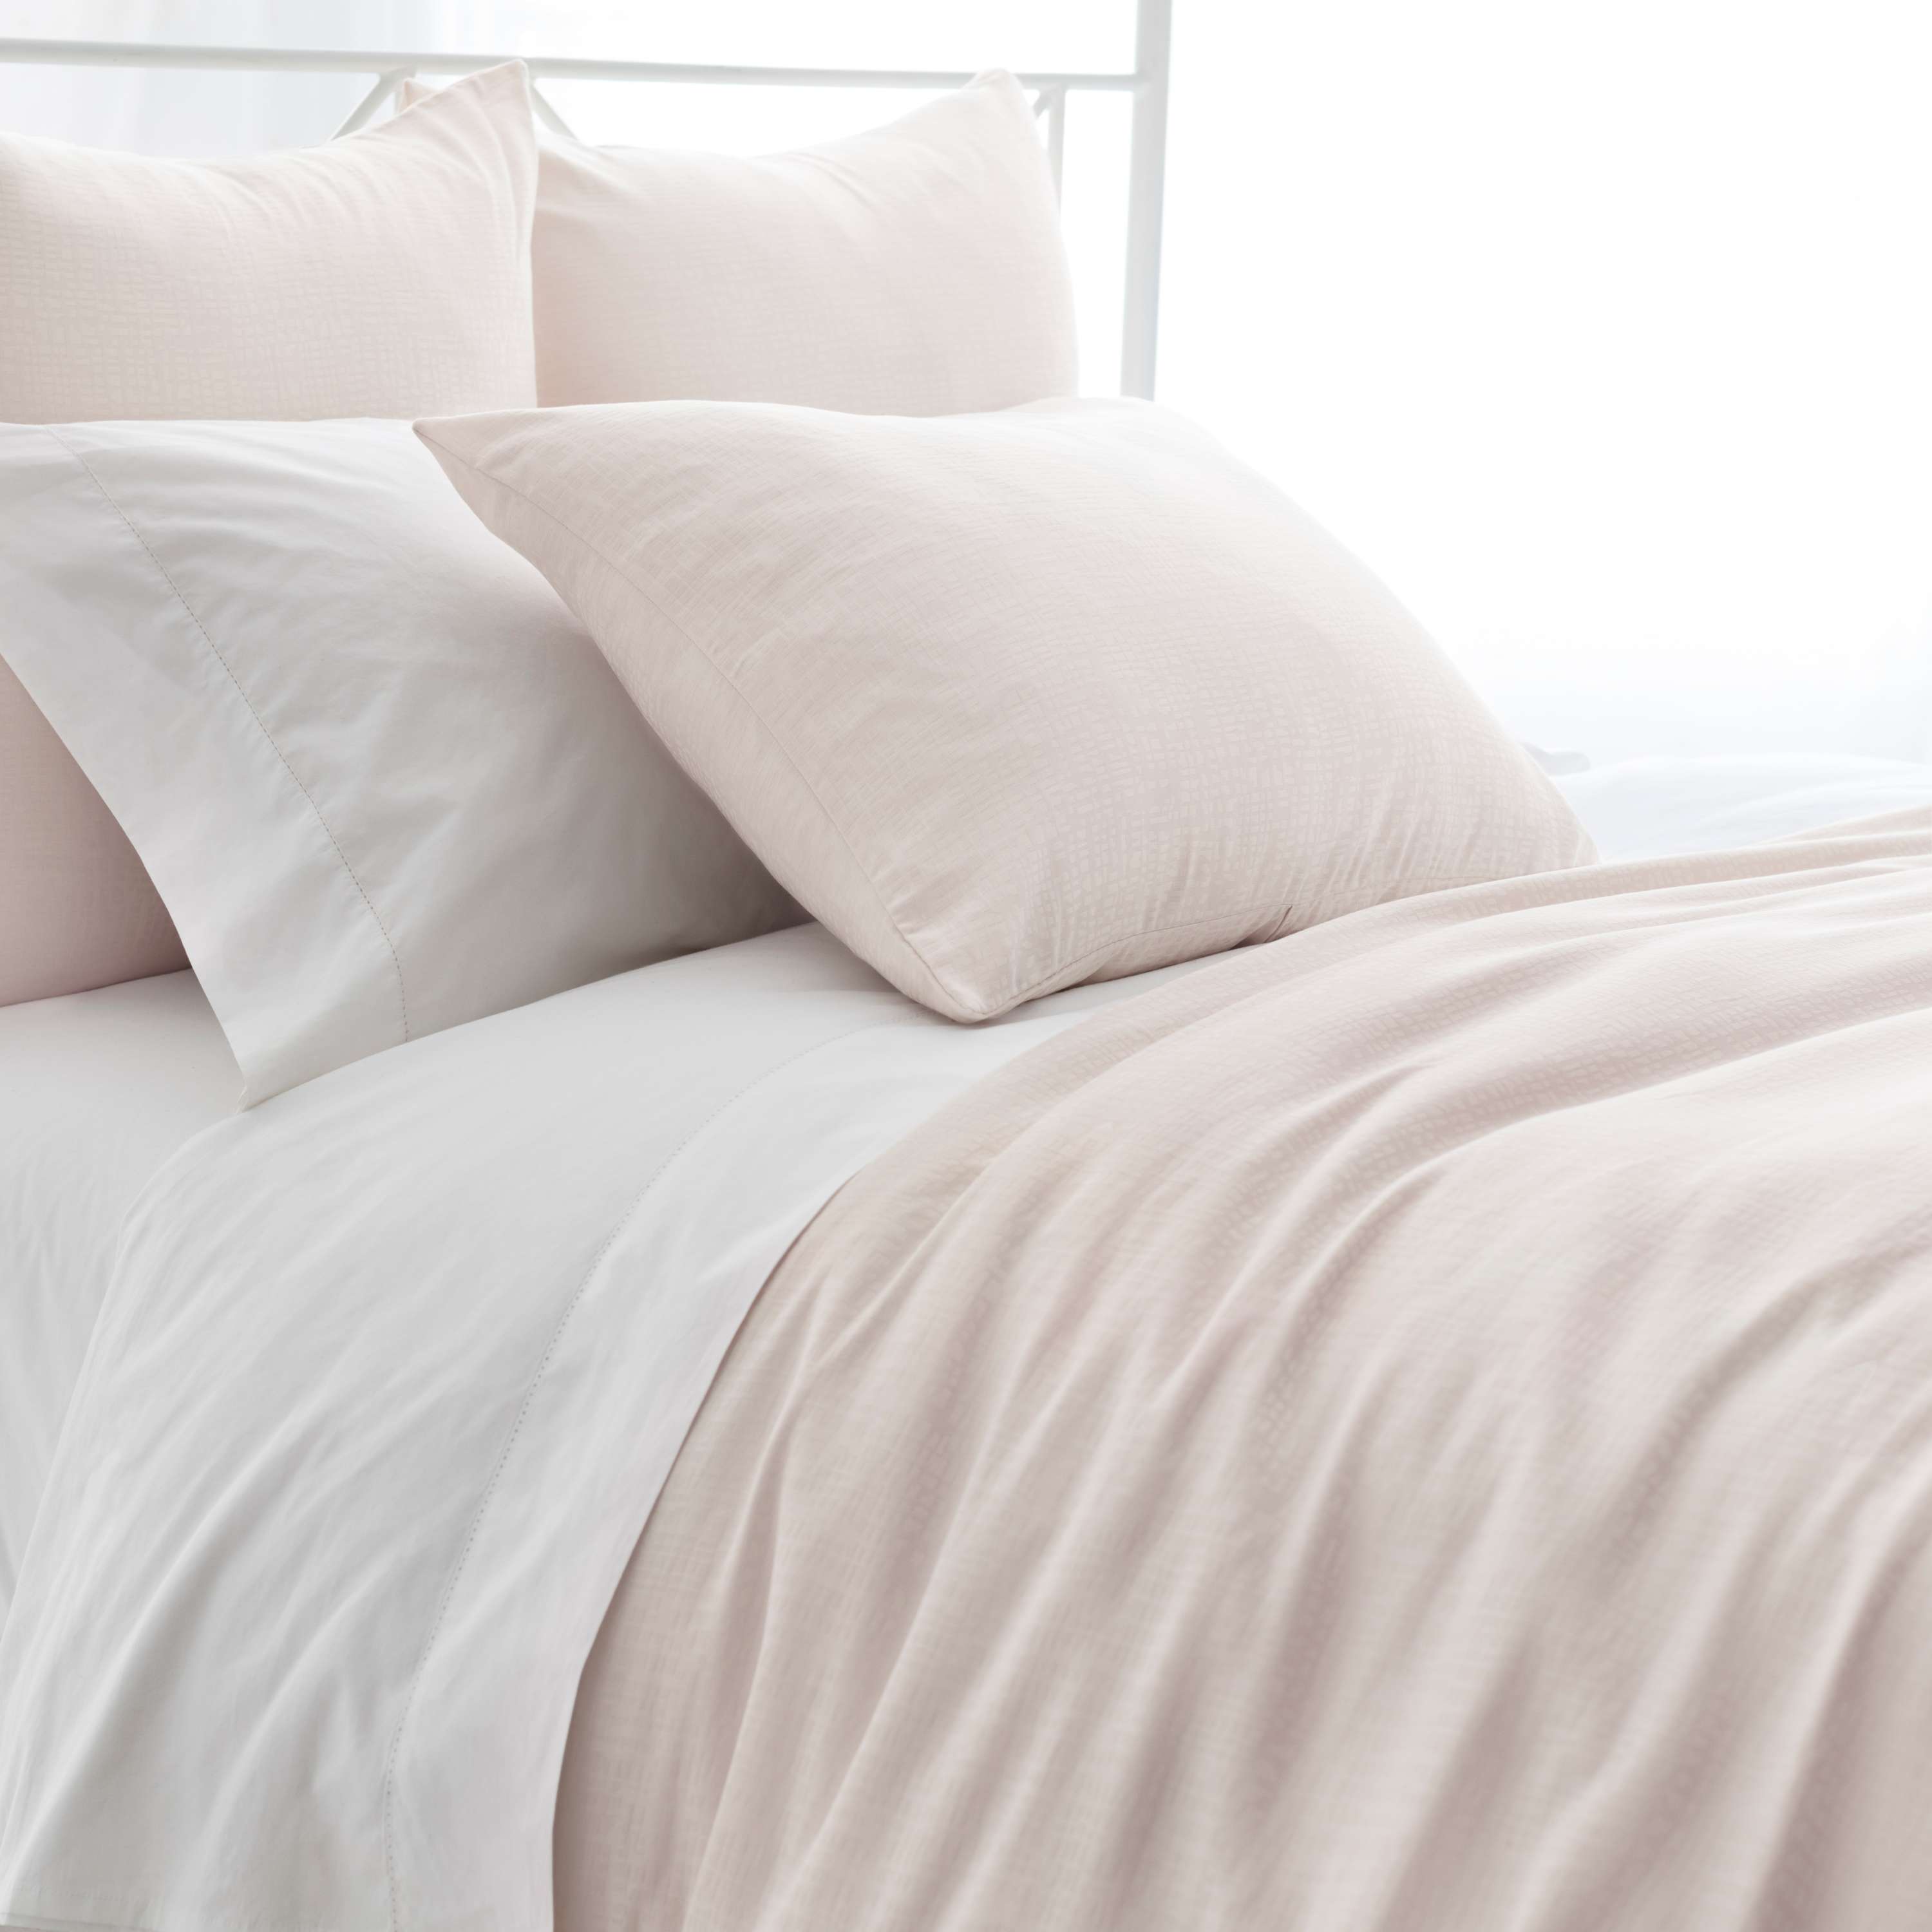 Pink Sale Bedding And Duvet Covers Annie Selke Outlet